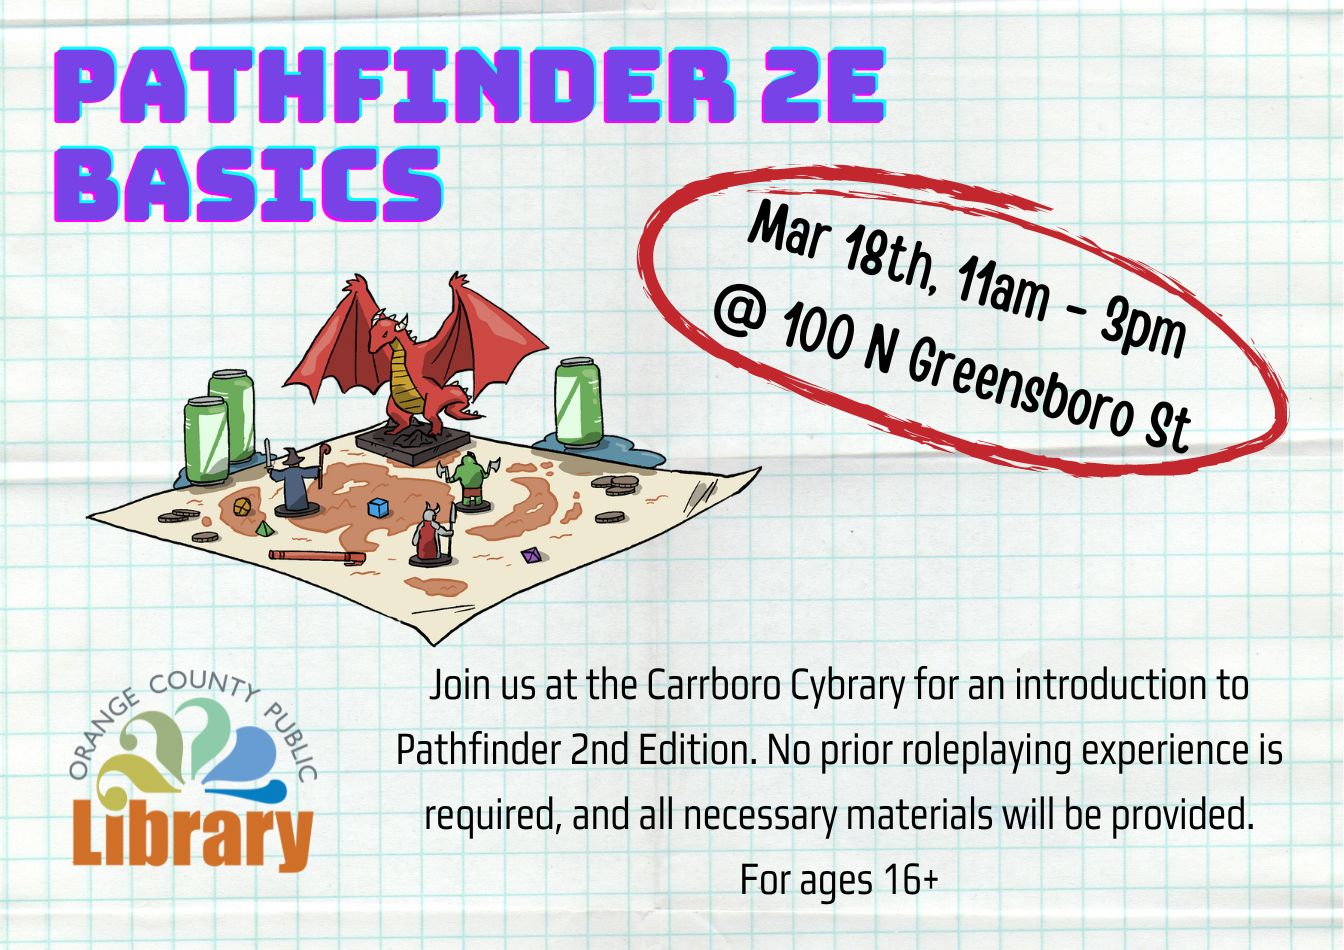 A gridded flyer with an image of a game mat. On the mat, figurines representing payer characters face off against a dragon. Text: Pathfinder 2E Basics. March 18, 11 am to 3 pm. Join us at the Carrboro Cybrary for an introduction to Pathfinder Second Edition. No prior rolepaying experience is required, and all necessary materials will be provided. For ages 16+.